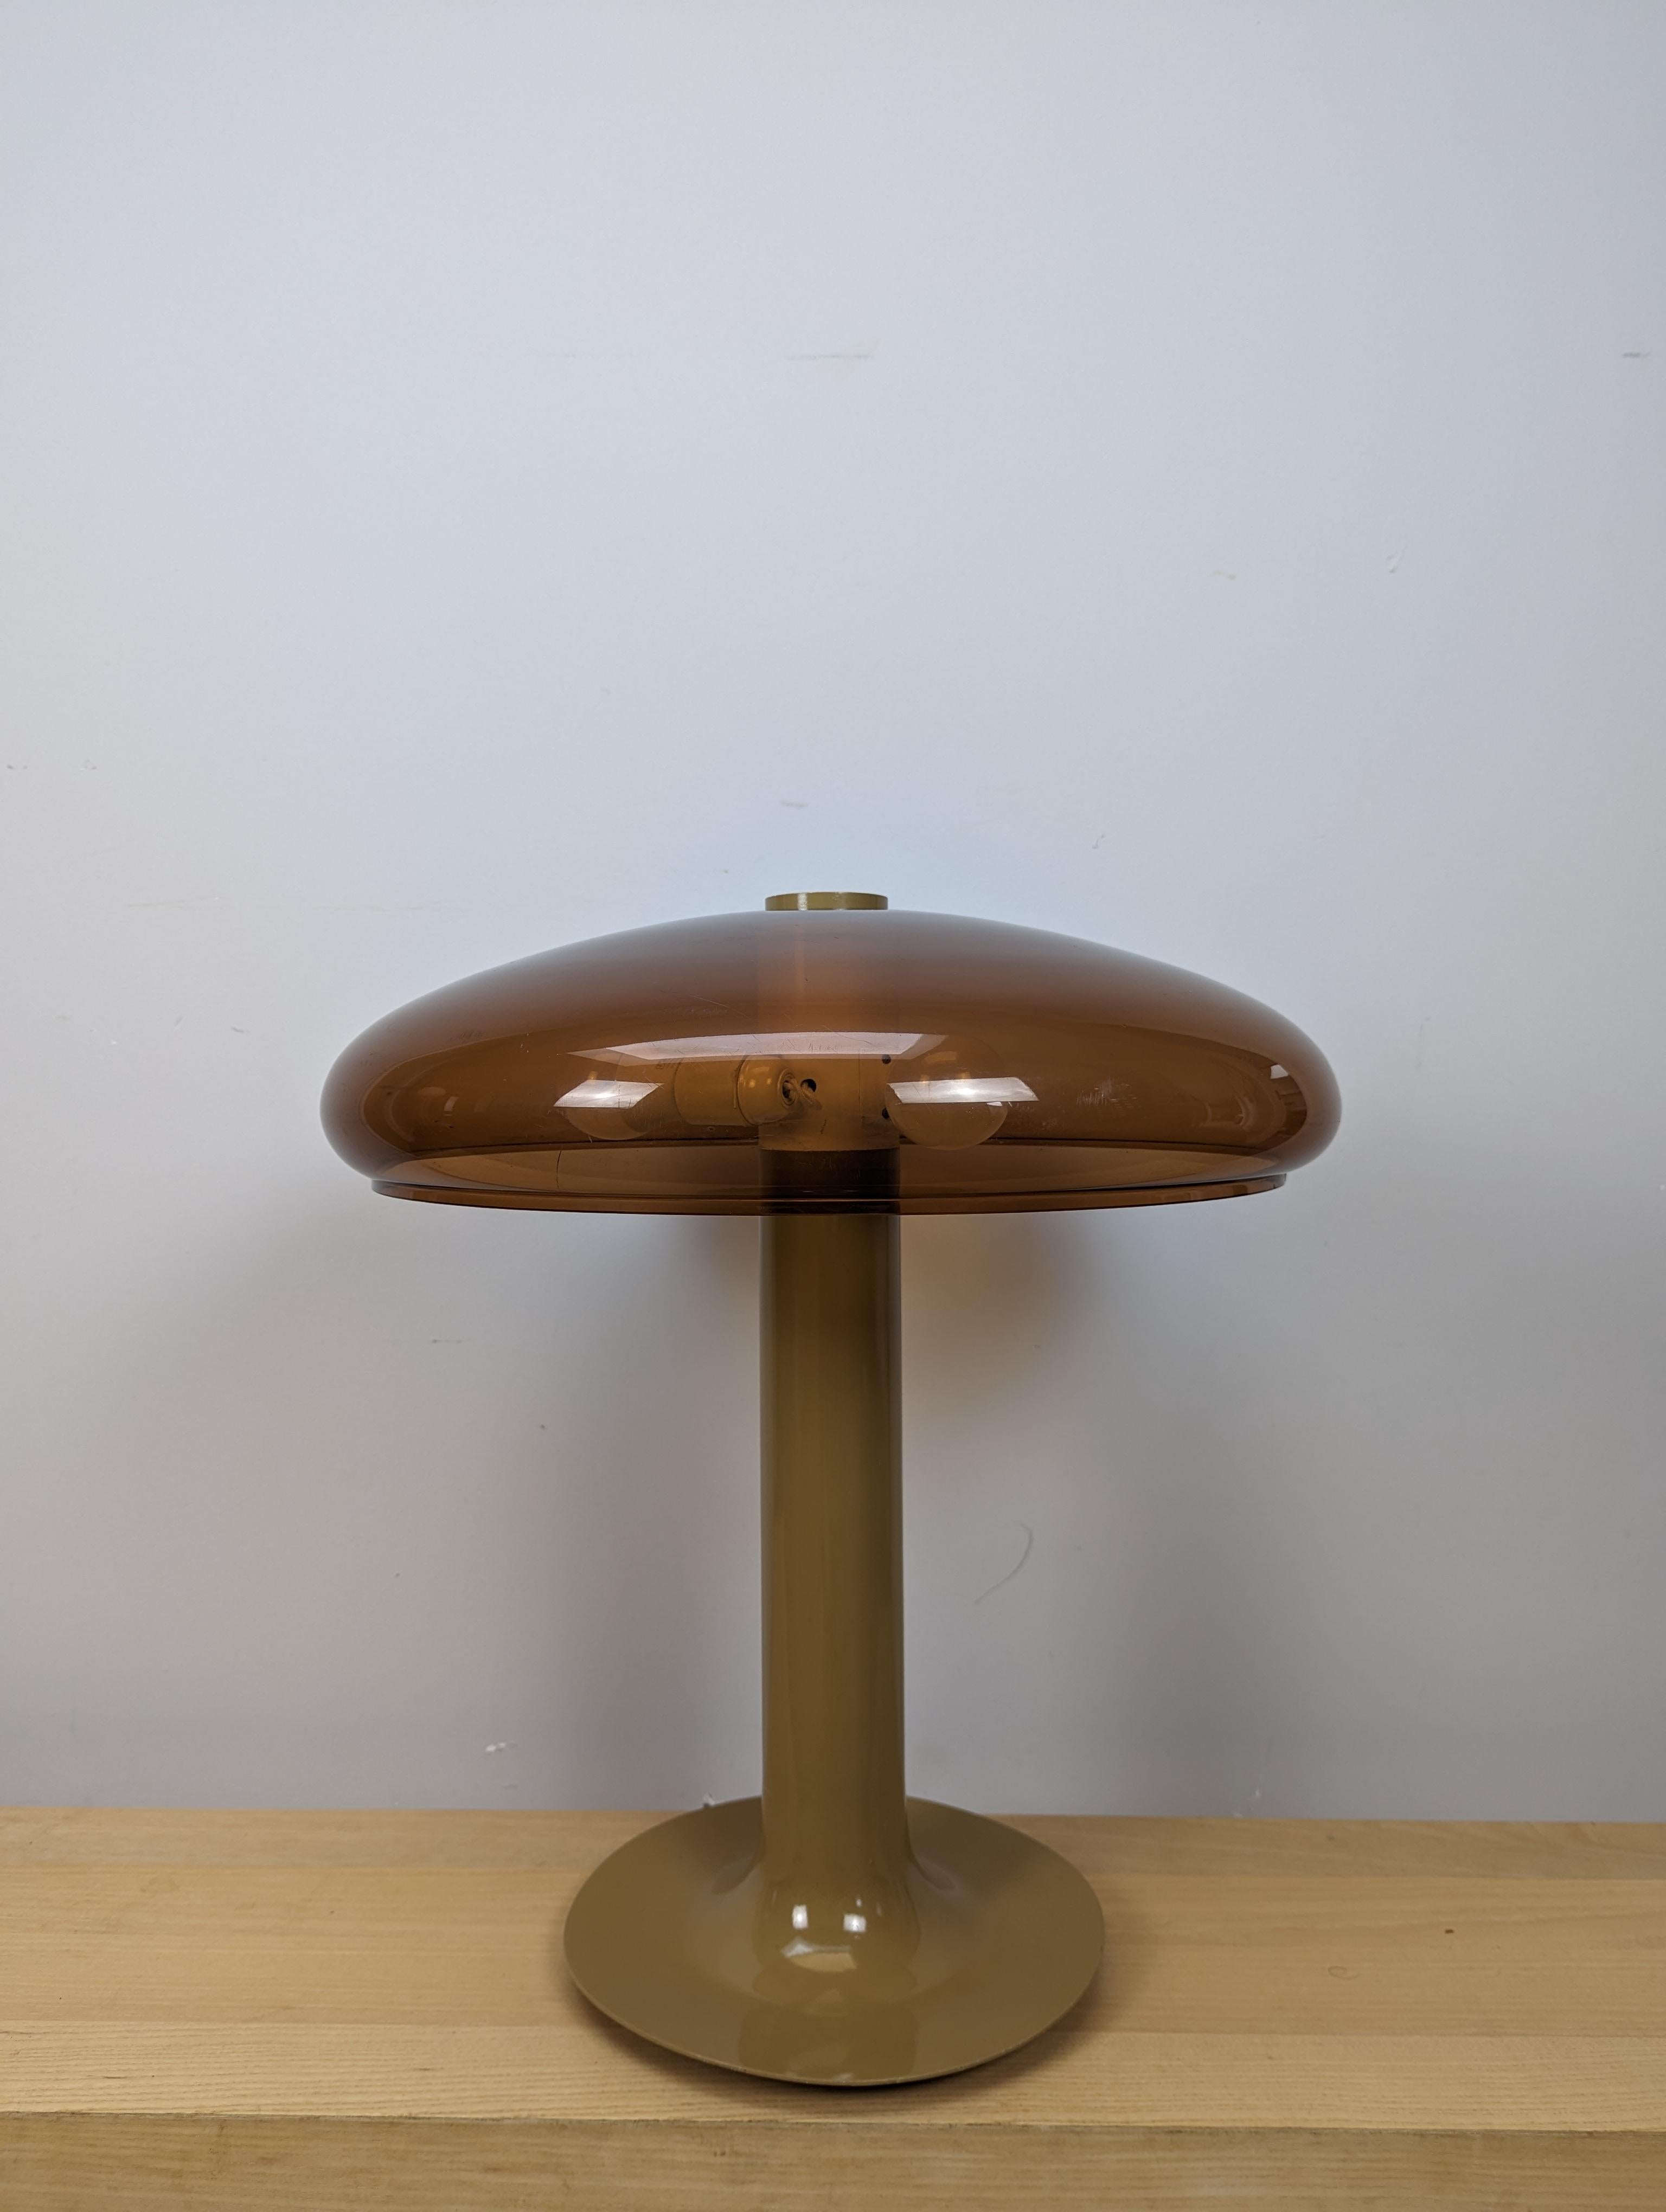 Spectacular mushroom shaped mid century table lamp

The pictures do not do this lamp justice as the lamp has presence due to its size.

The lamp is in very good condition for its age with only small age related marks.

A true one off design with an